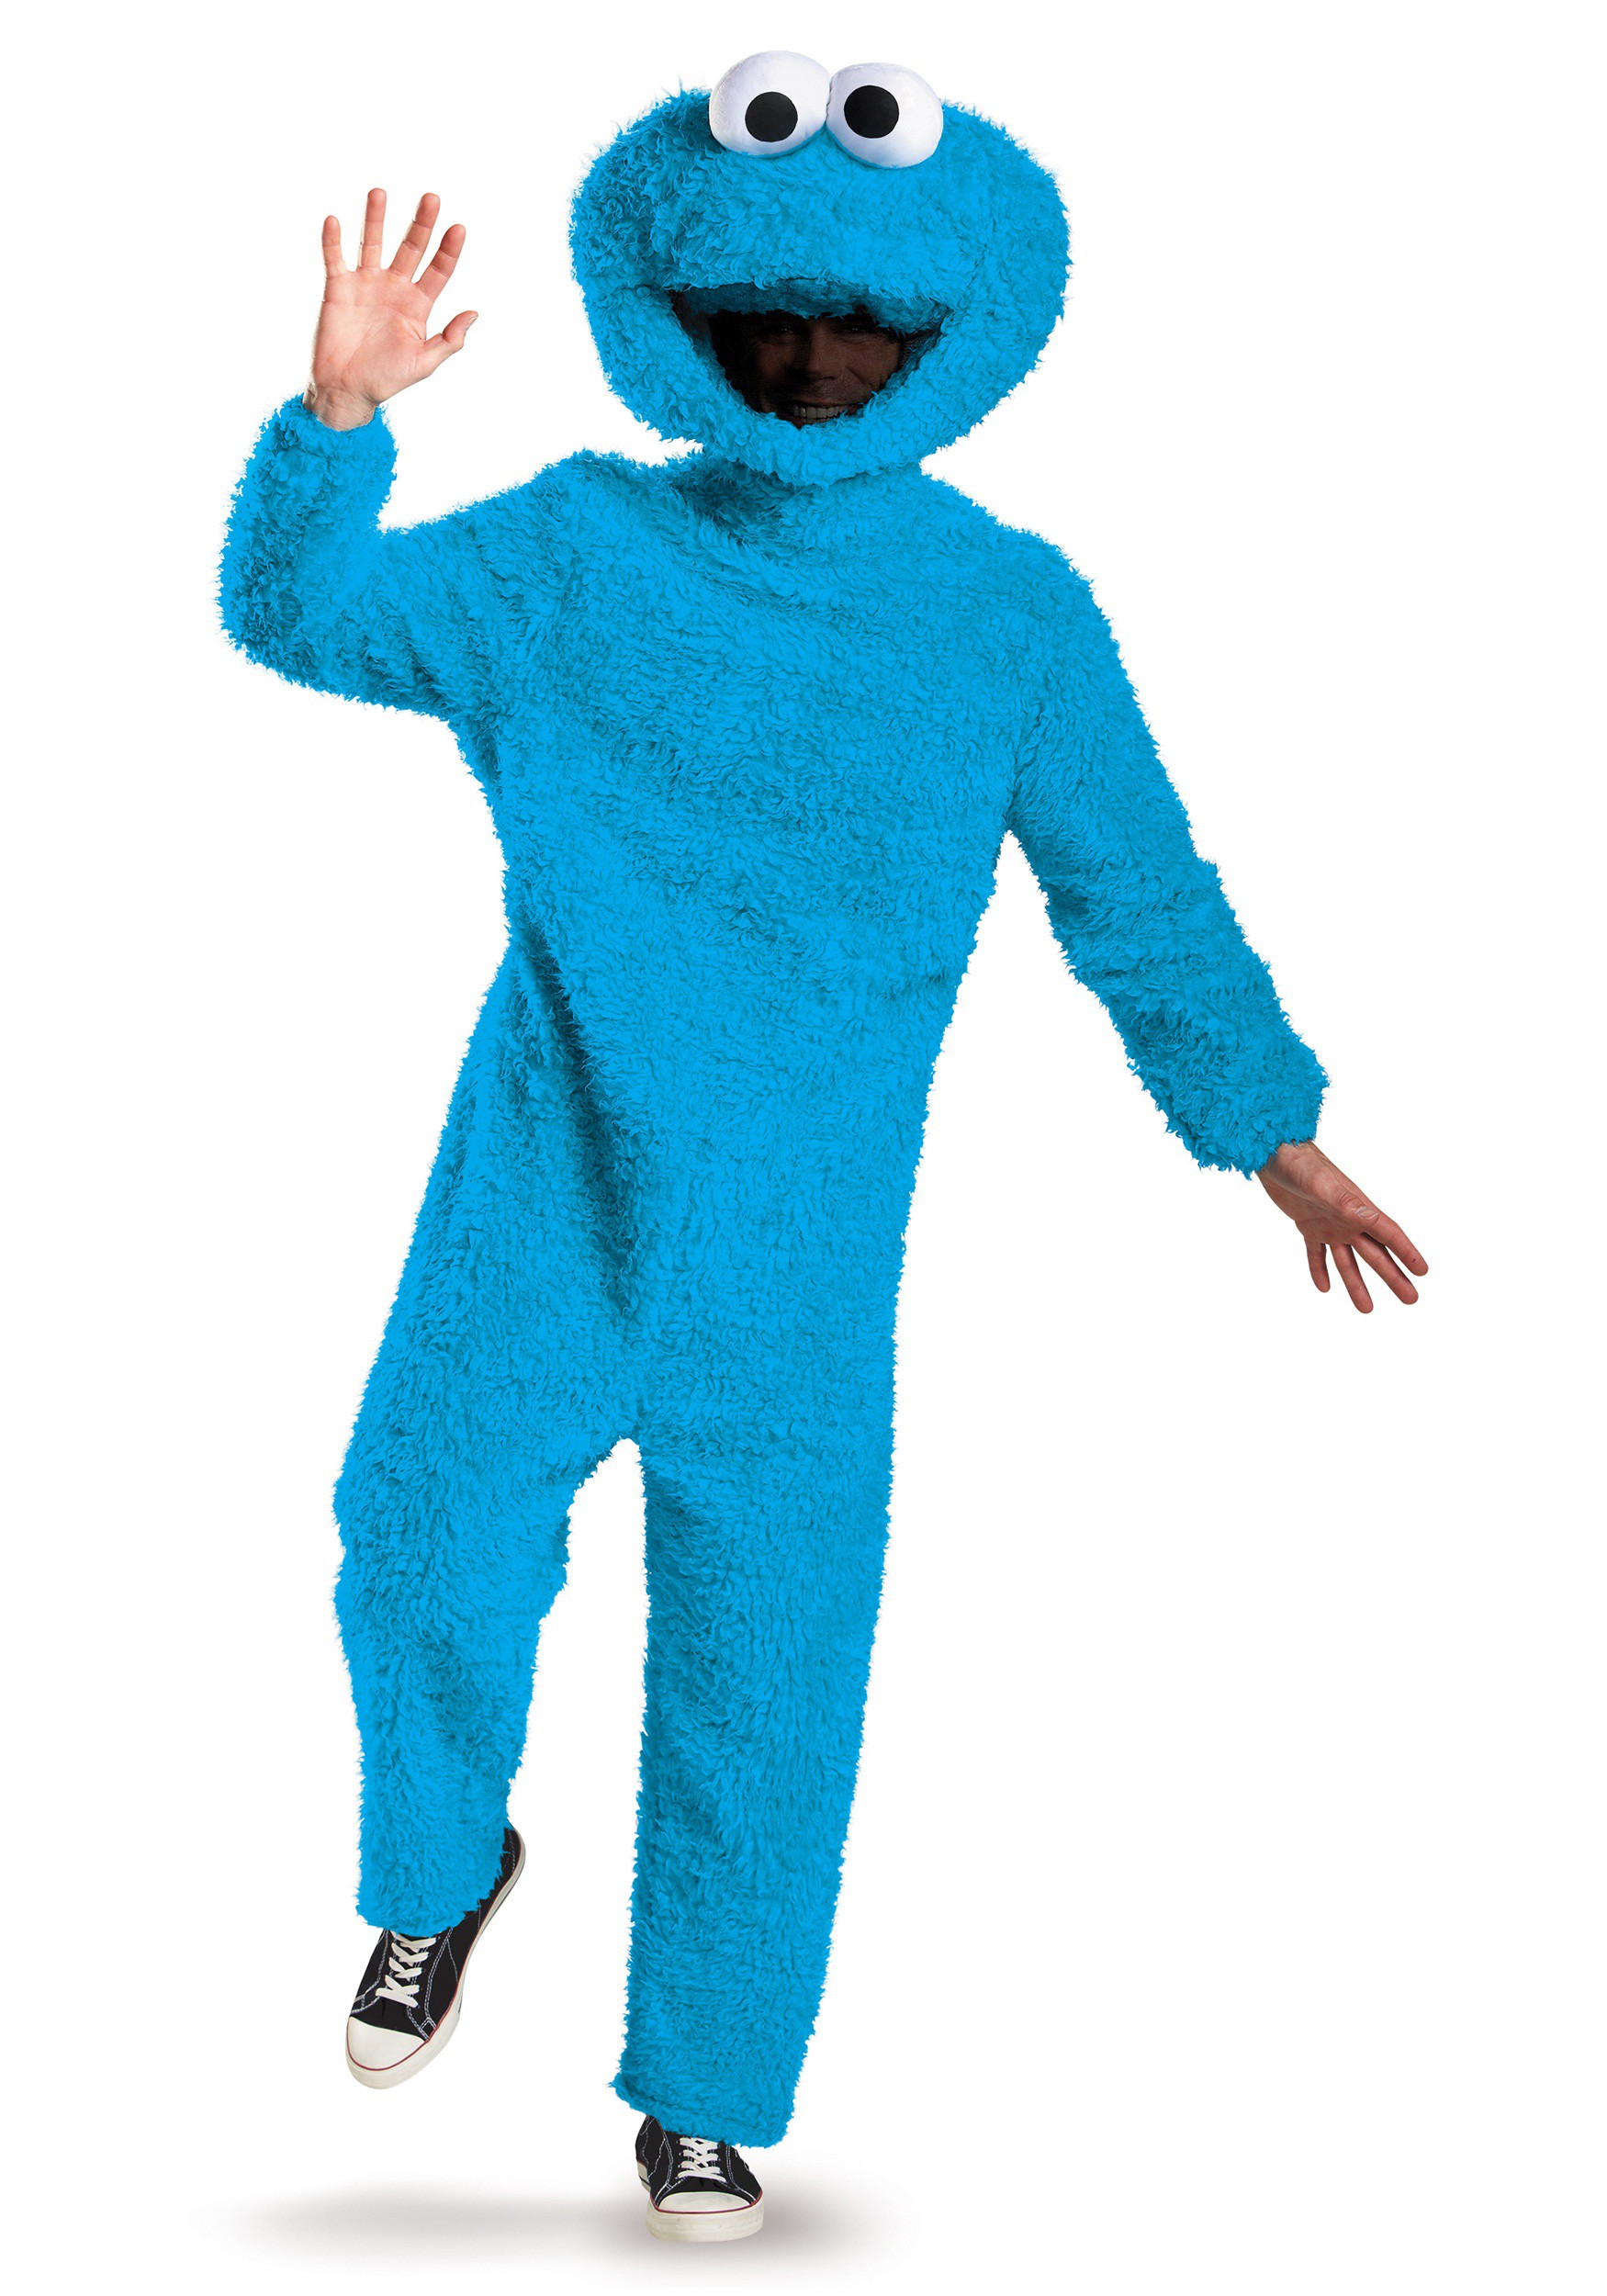 Photos - Fancy Dress Prestige Disguise  Cookie Monster Costume for Adults Blue DI86545 